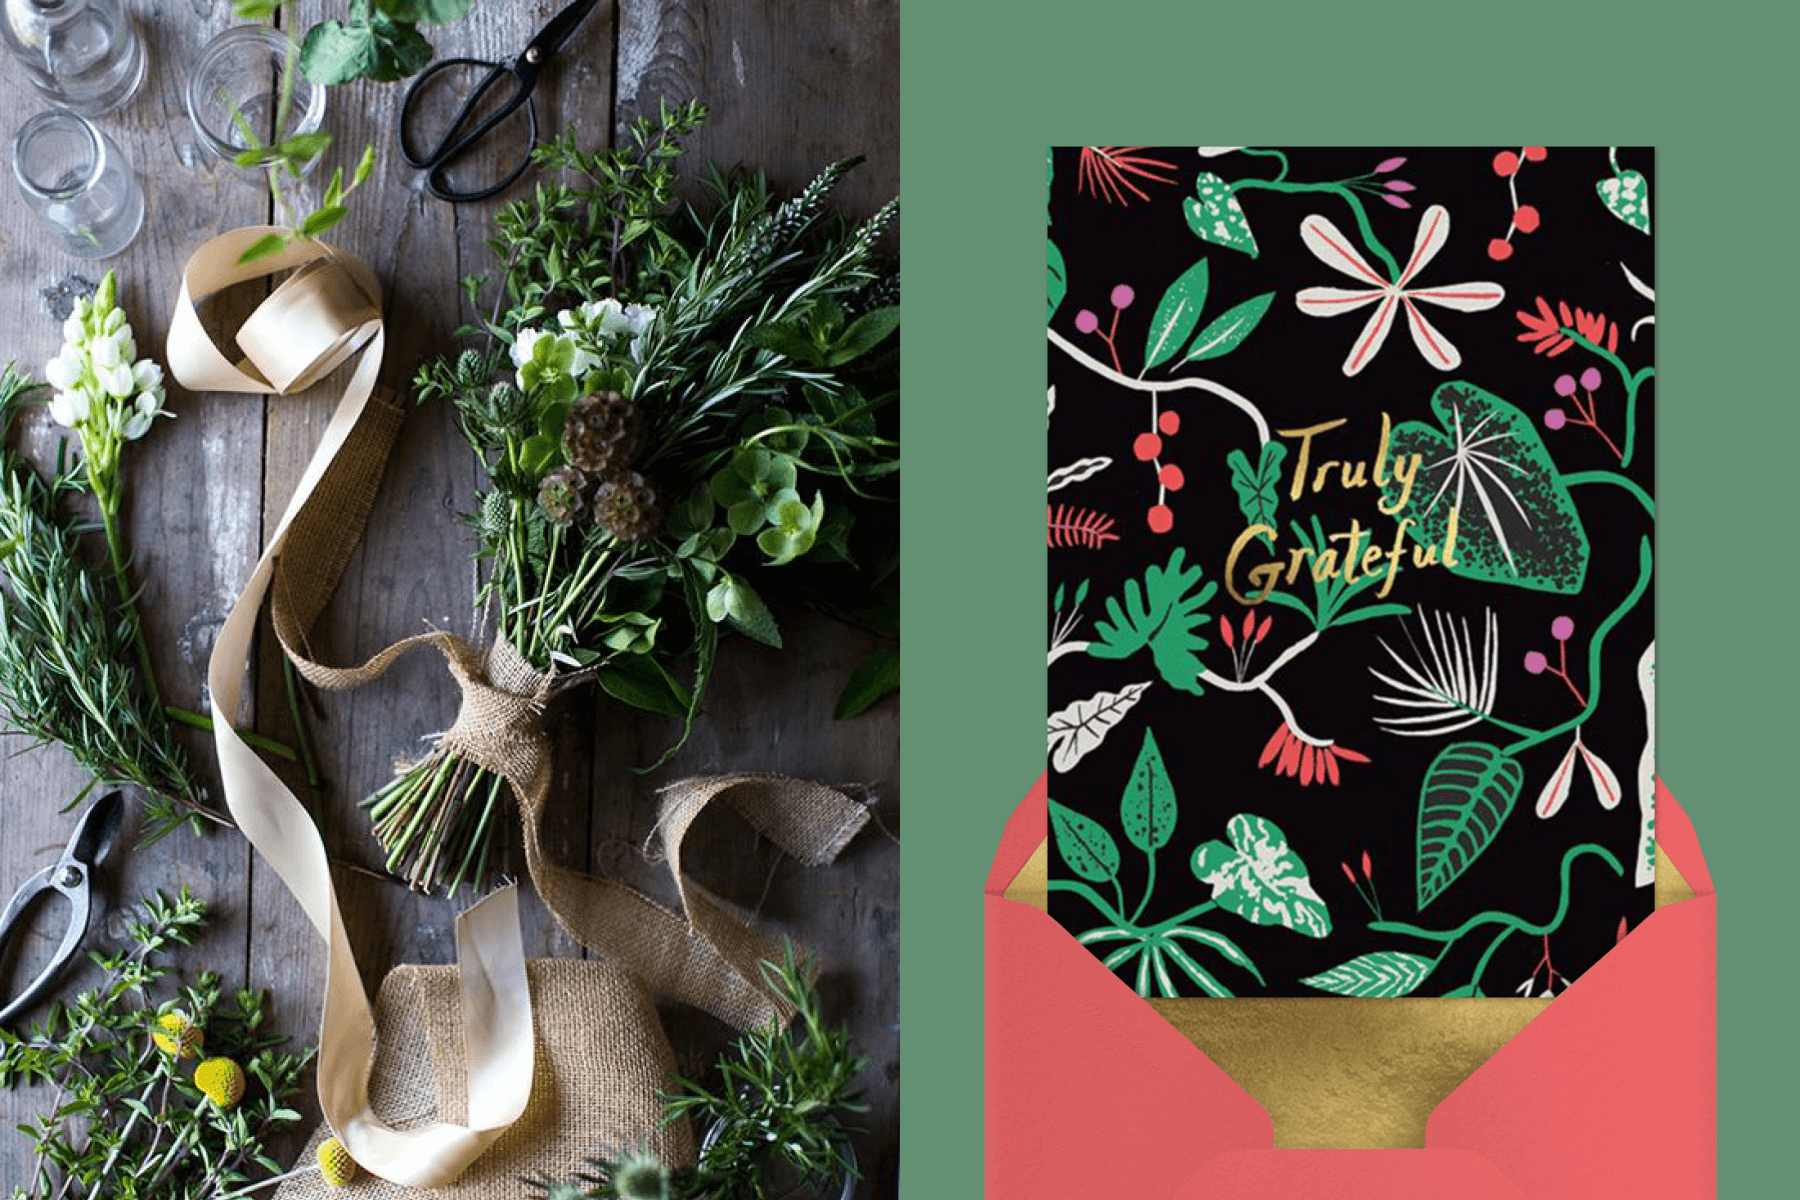 Left: A newly-created bouquet of greenery tied with burlap surrounded by floral supplies like vase and scissors; right: a black thank you card with illustrations of tropical plants and the words “Truly grateful.”